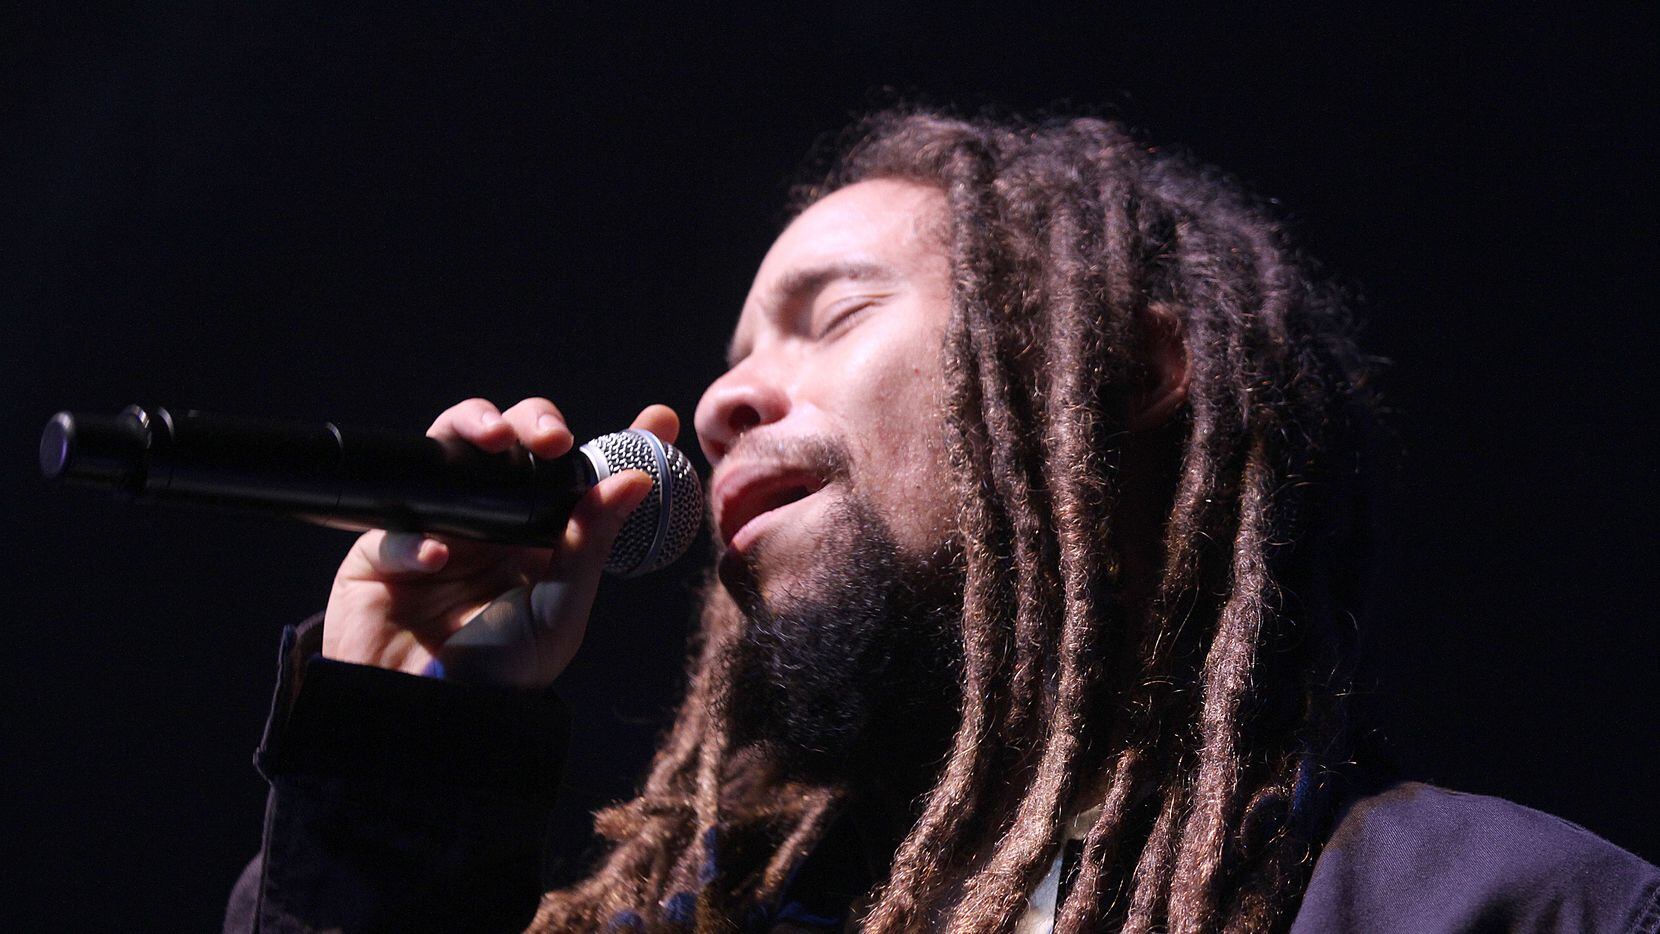 Jo Mersa Marley performs during the "Catch A Fire Tour 2015" stop at The Paramount in...